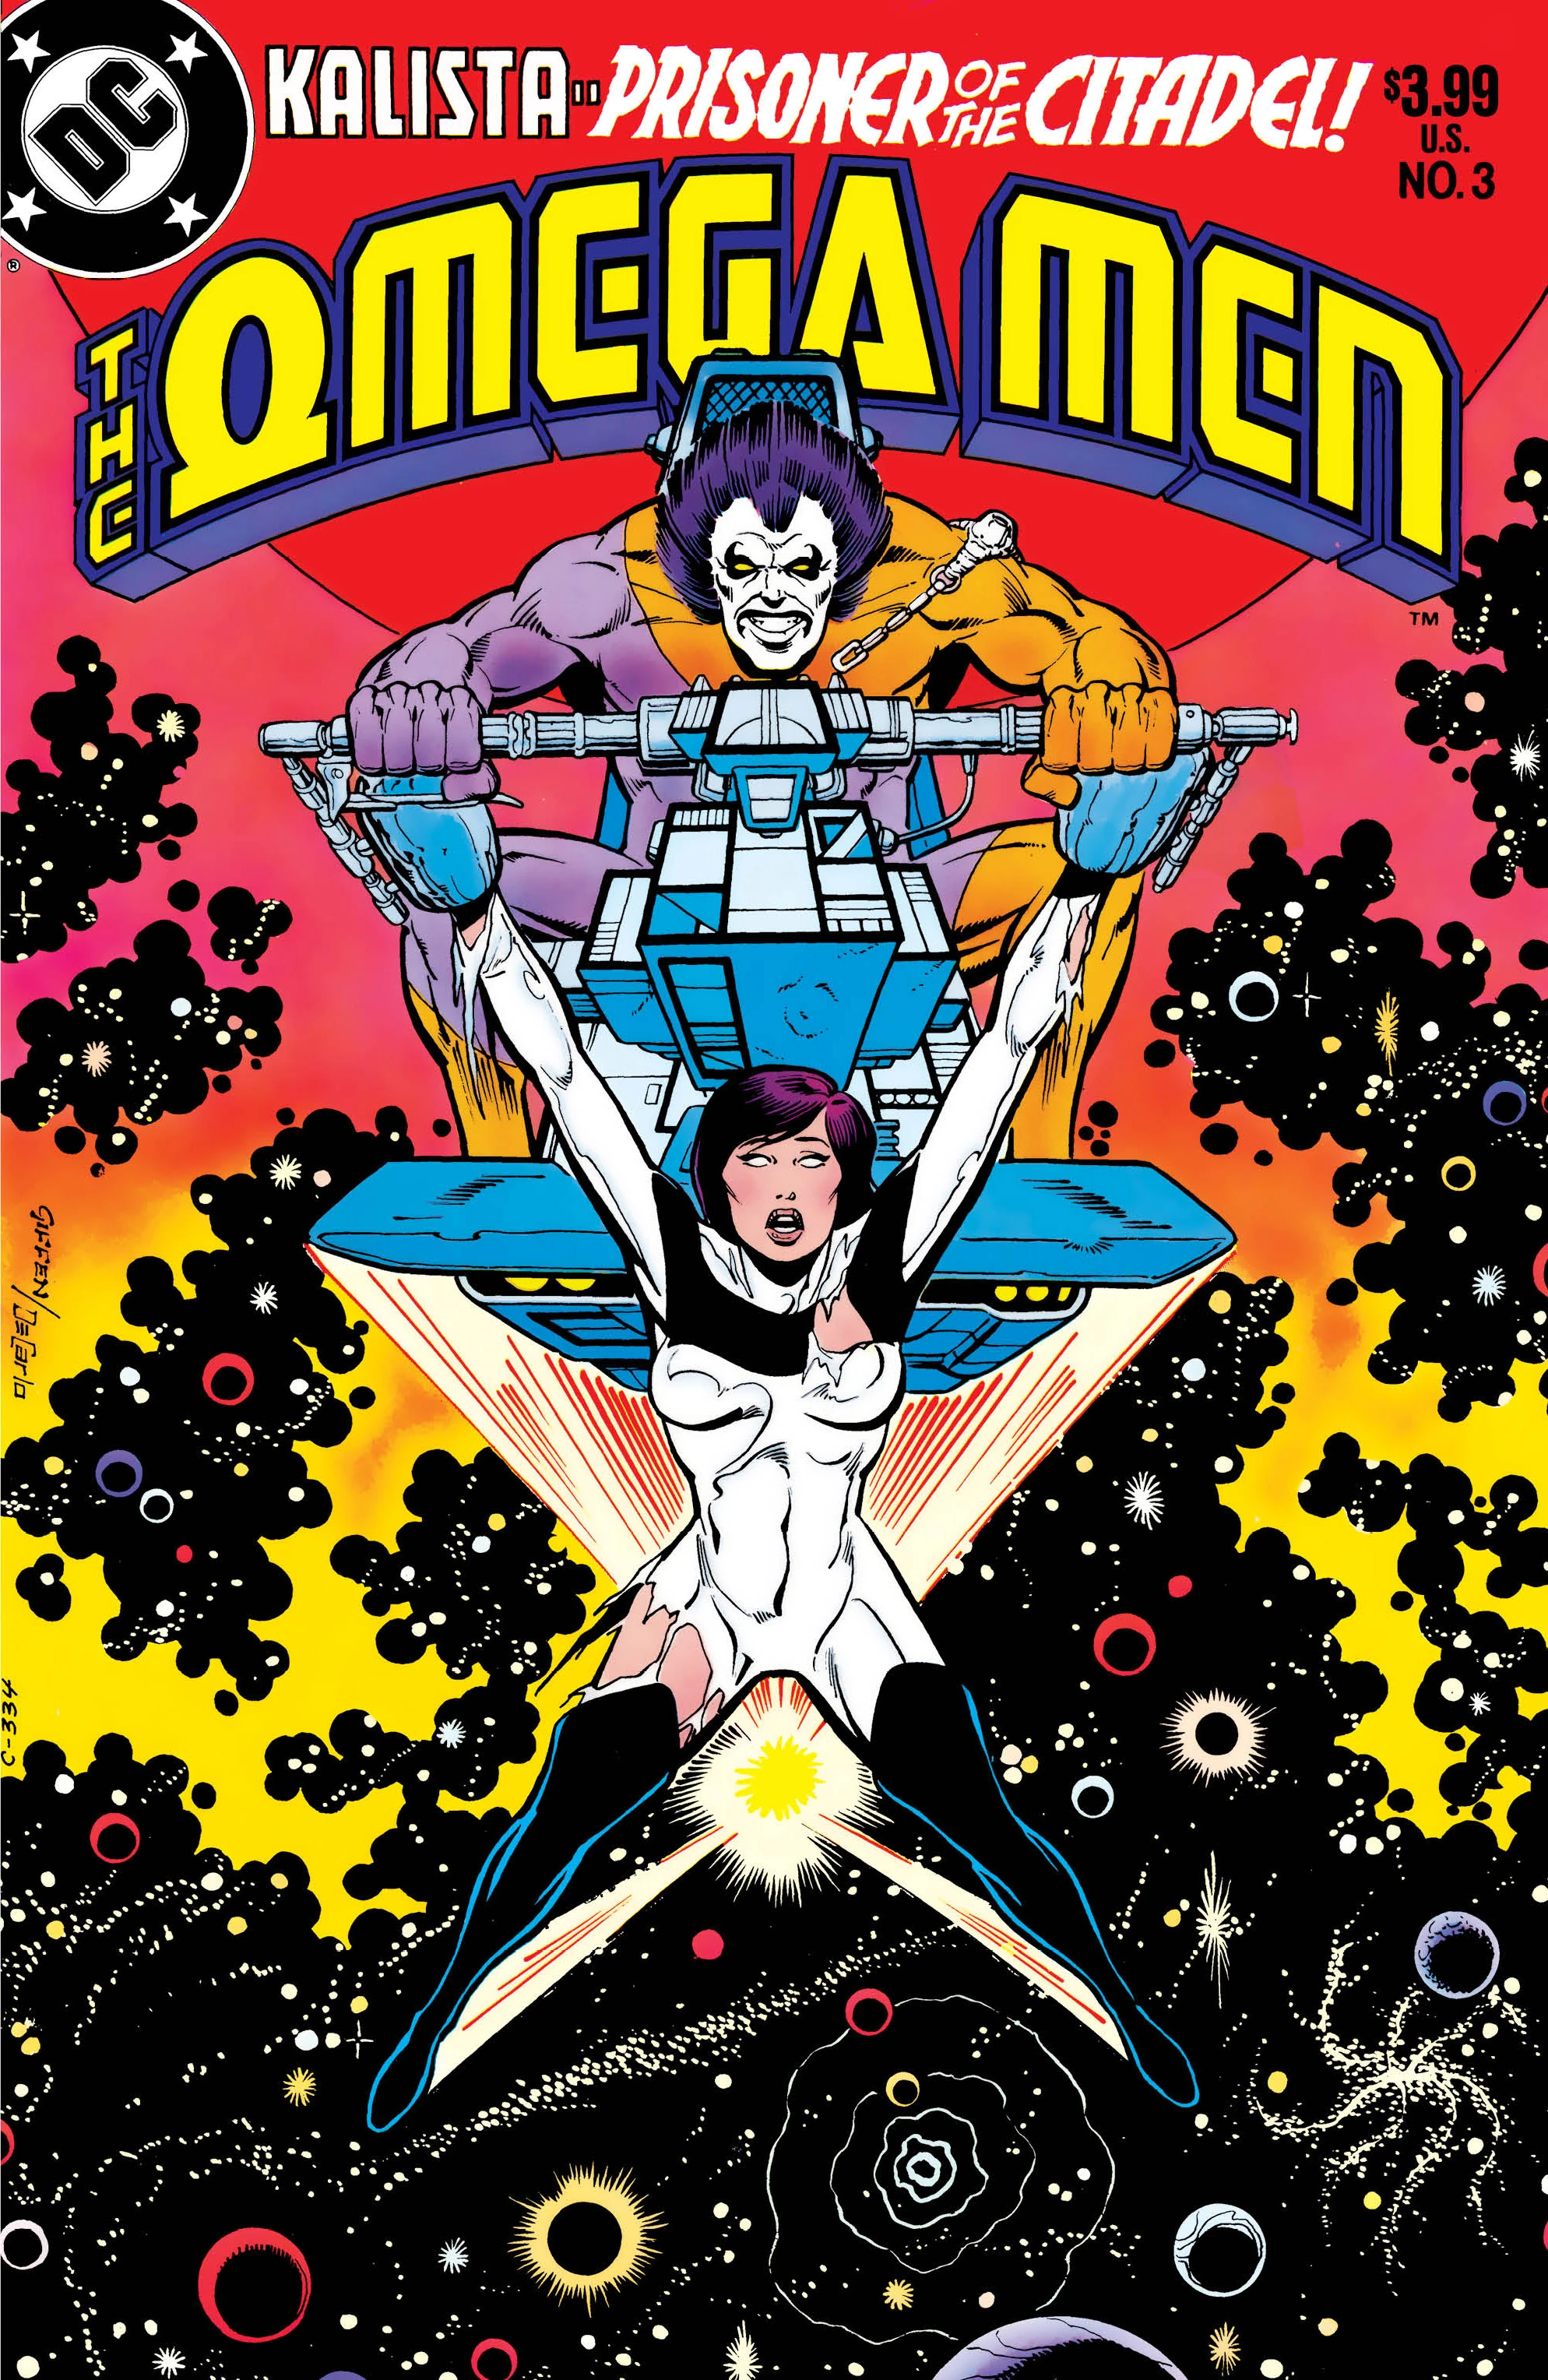 Lobo tears his way into the DCU on Keith Giffen and Mike DeCarlo's cover to Omega Men Vol. 1 #3 "Assault on Euphorix" (1983), DC